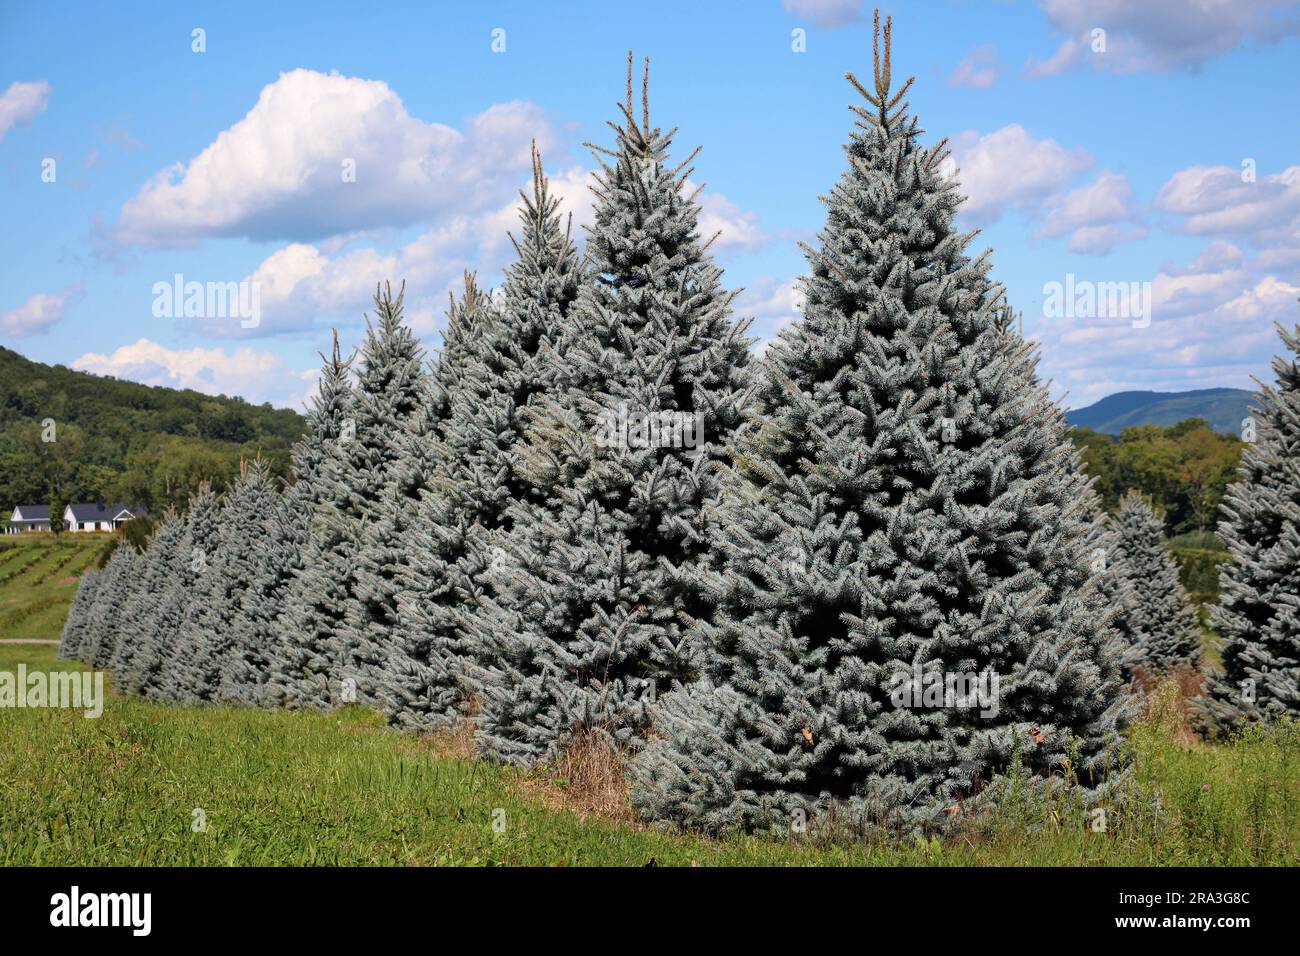 blue trees in row bright colors (green conifers spruce fir pine xmas tree farm) meadow blue sky clouds Stock Photo